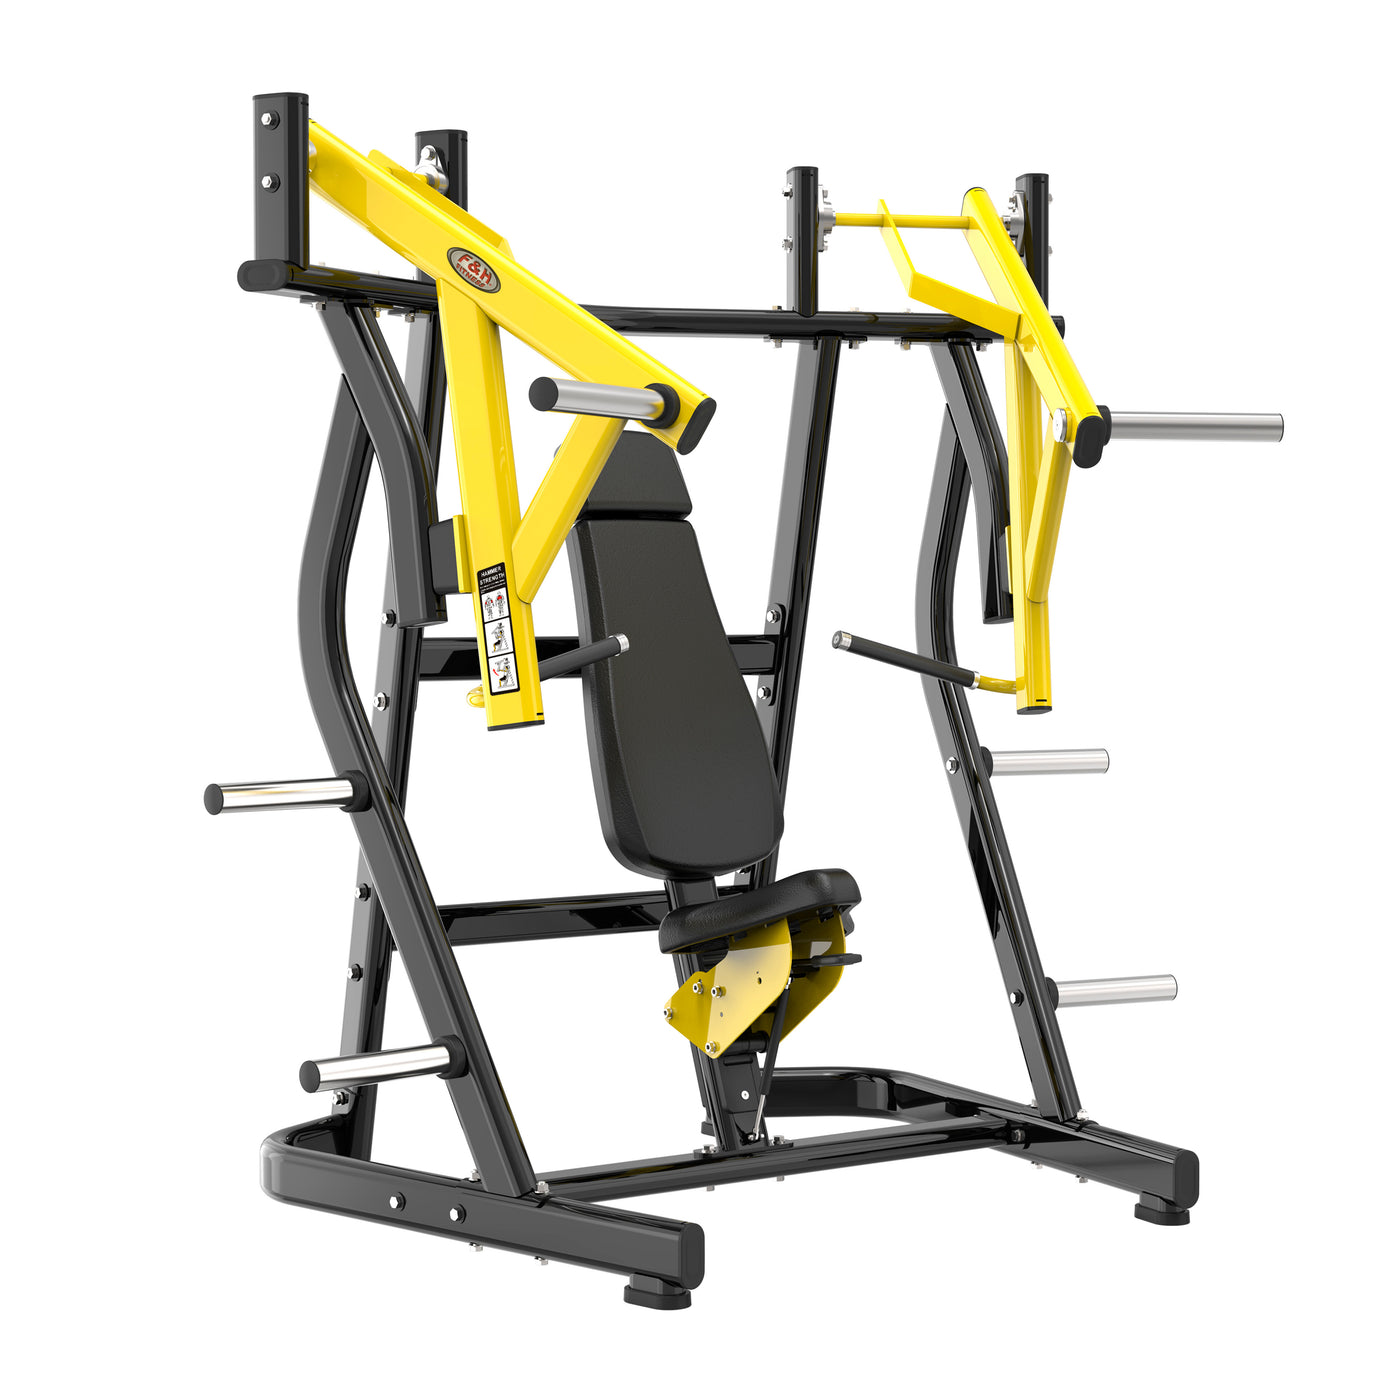 IFN 04 SEATED CHEST PRESS